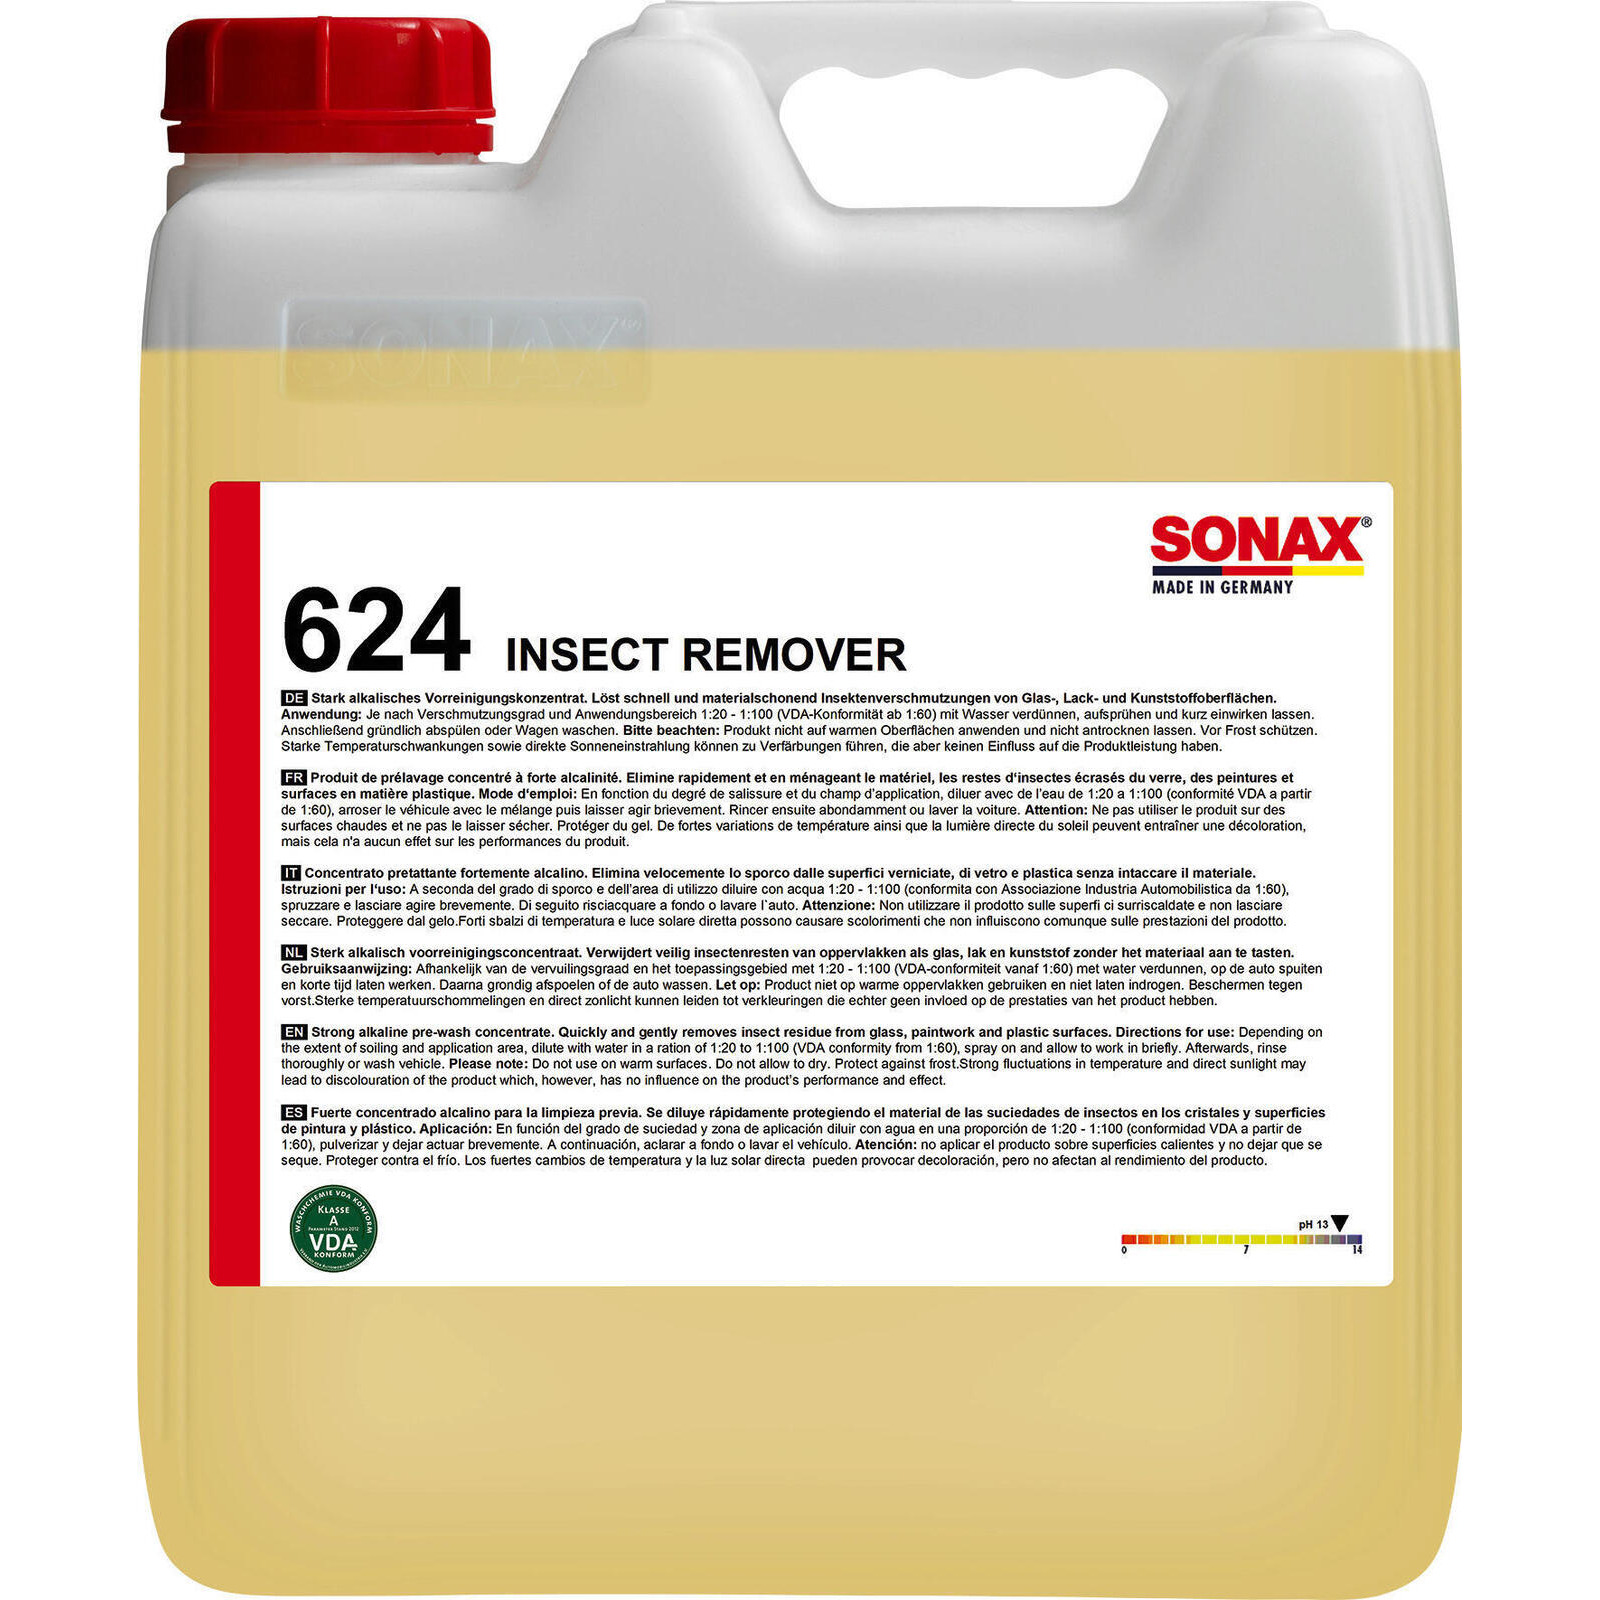 SONAX Insect Remover Insect Remover for Automatic Car Washes